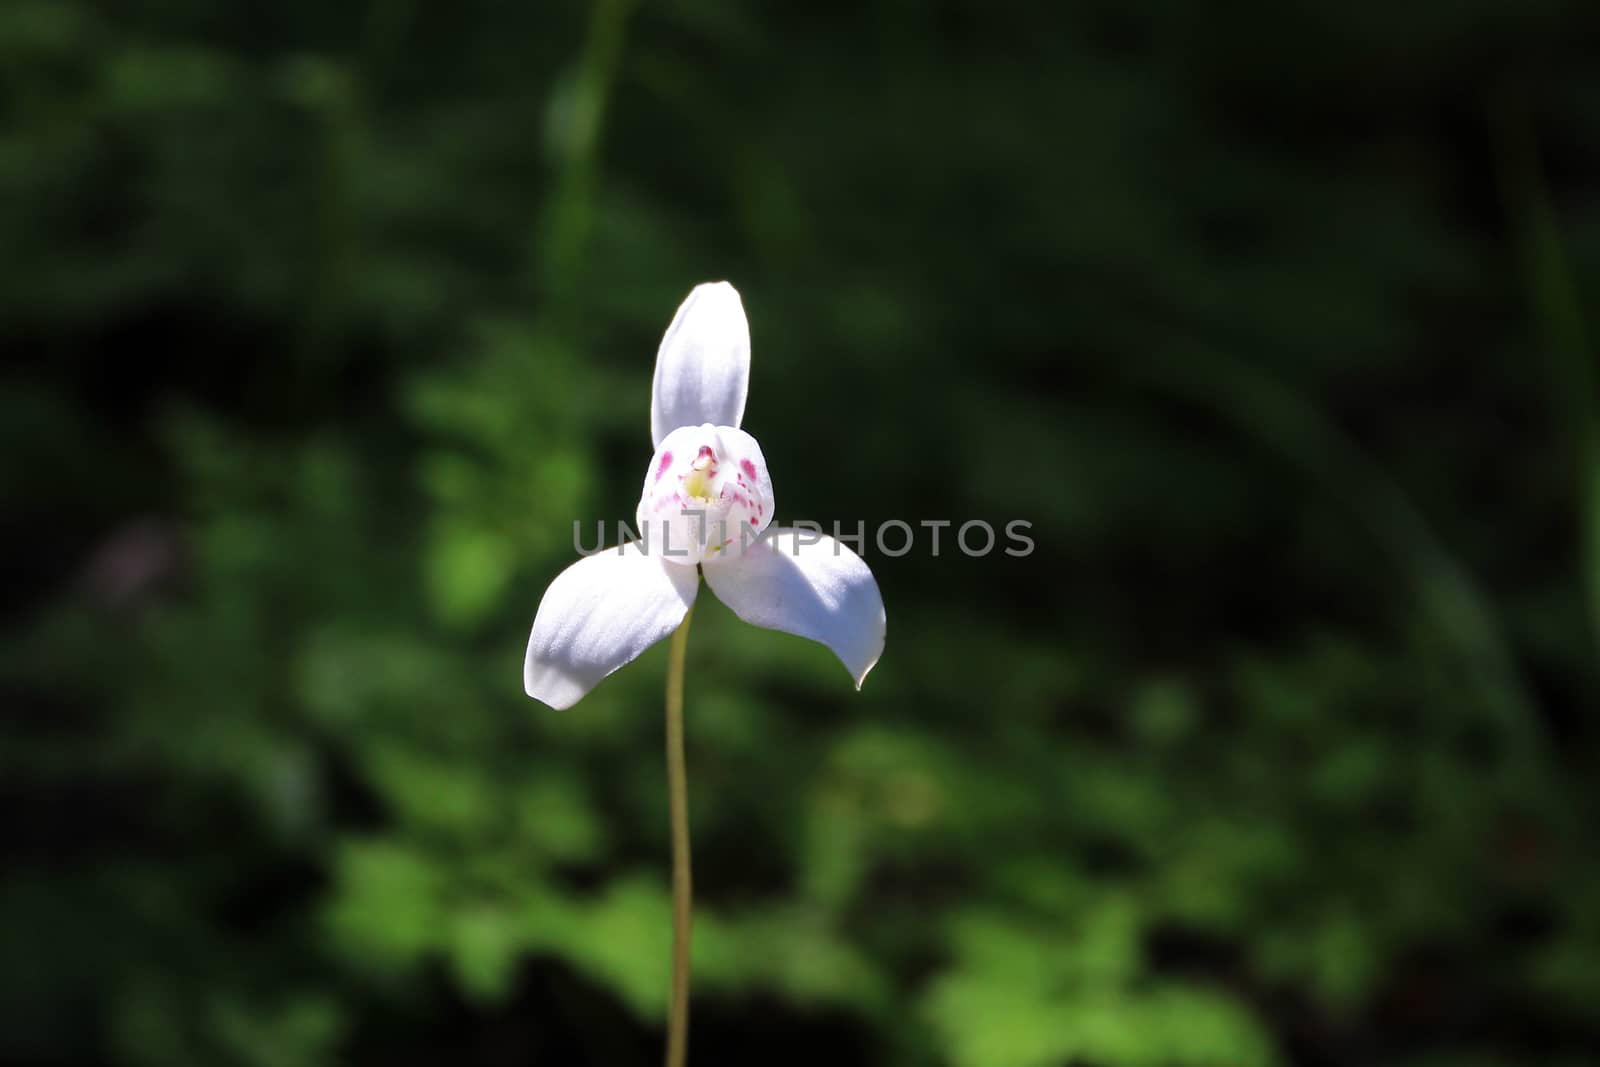 White Dog Orchid, codonorchis lessonii, Ushuaia, Tierra Del Fuego, Patagonia Argentina